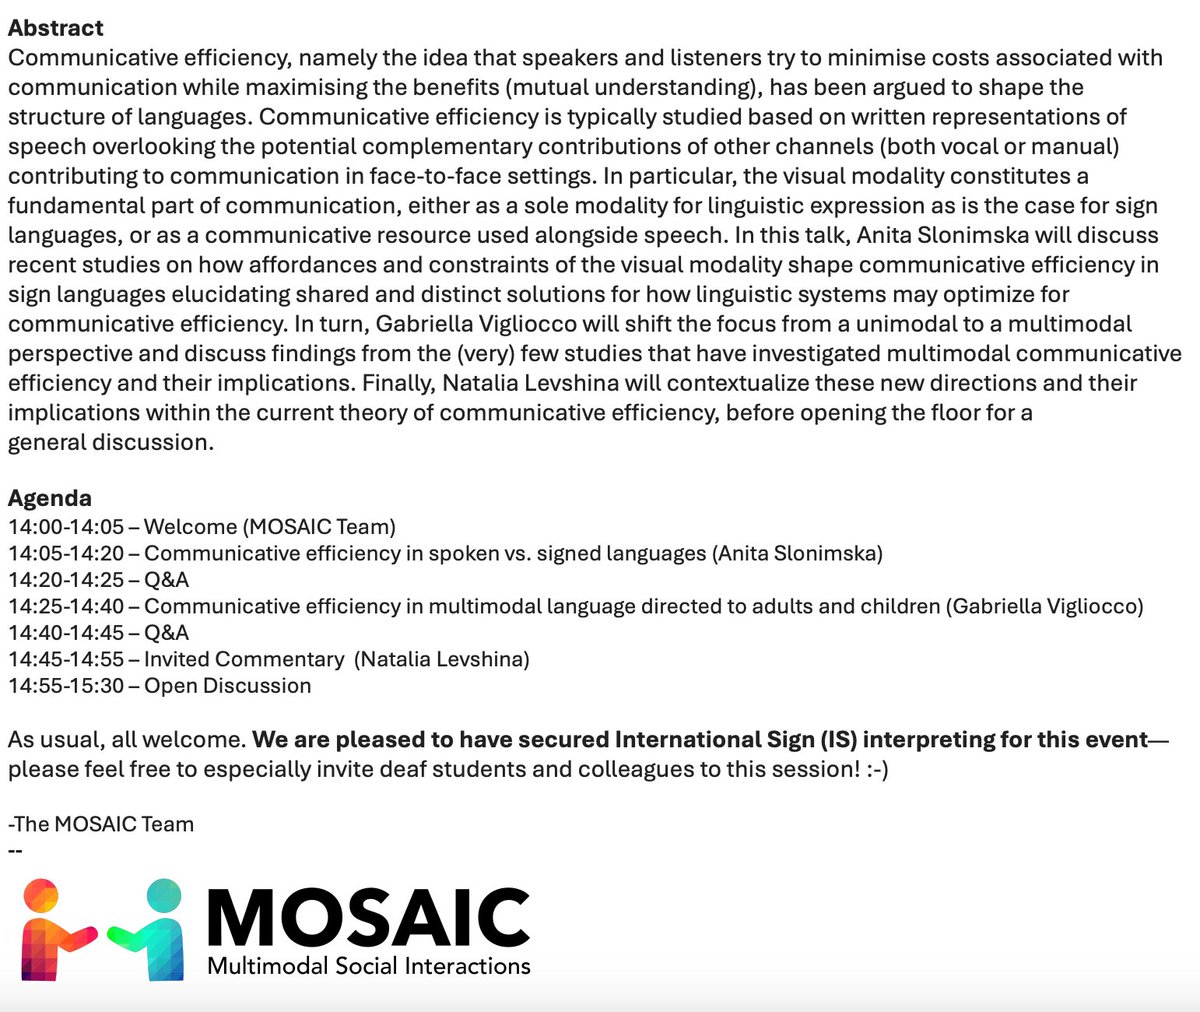 Our next MOSAIC meeting on 'Communicative Efficiency' will feature @anitaslonimska @vigliocco_g & @NataliaLevshina. We are thrilled that this session will have International Sign interpreting! 🤟All welcome! Thur, 25 April, 2pm-3.30pm UK time (contact @jonasnoelle for Zoom link)